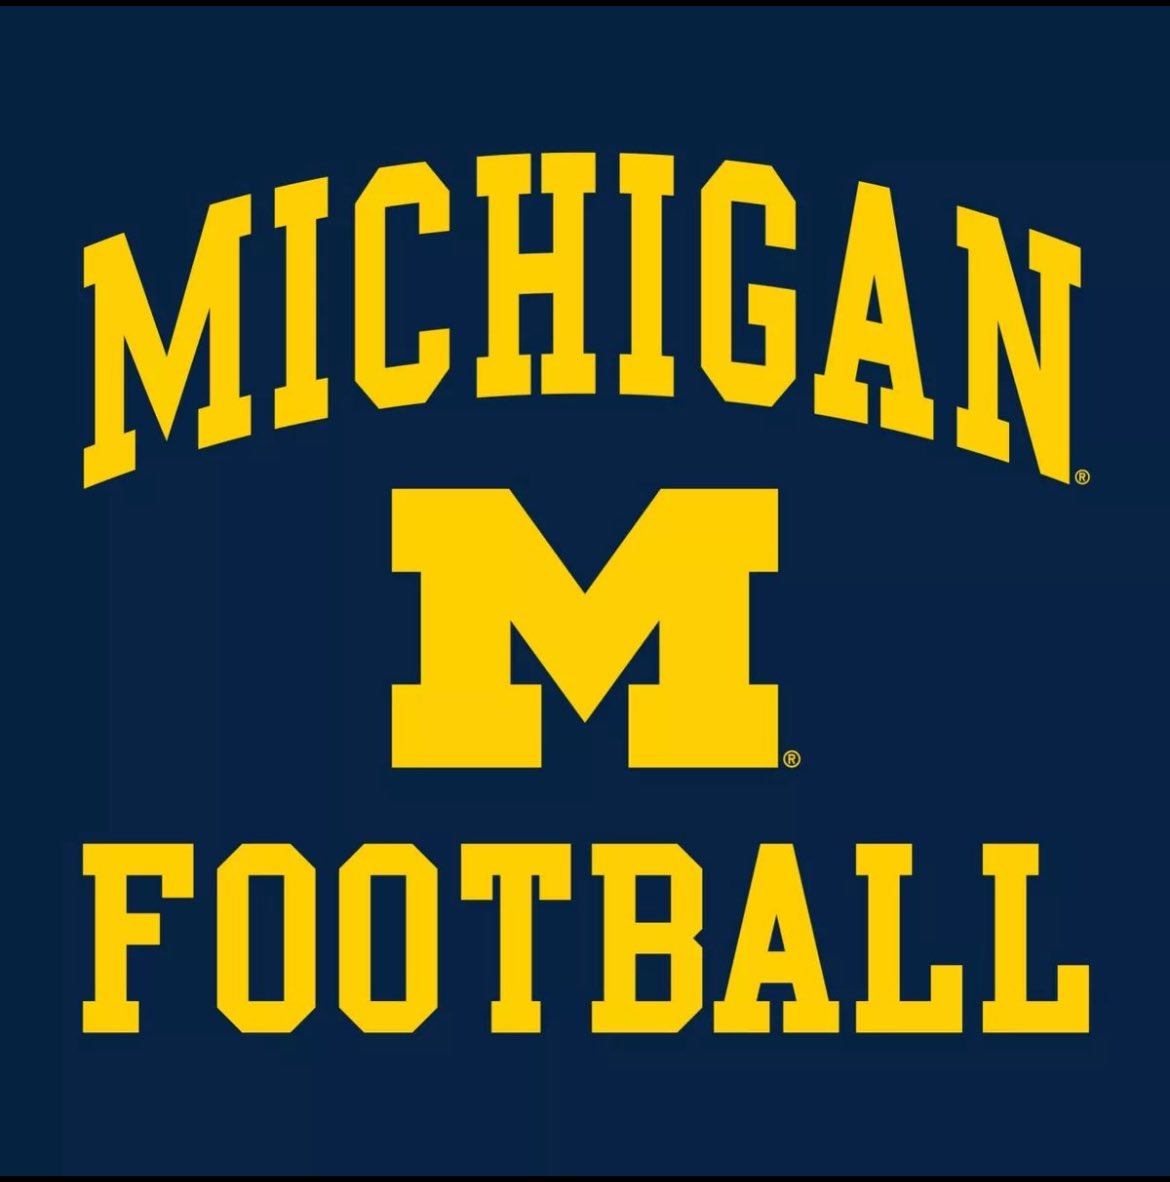 Blessed and excited to have accepted a position at the University of Michigan as a Recruiting Analyst. Thank you to everyone who’s helped and supported me along the way! Can’t wait to get to work! #GoBlue